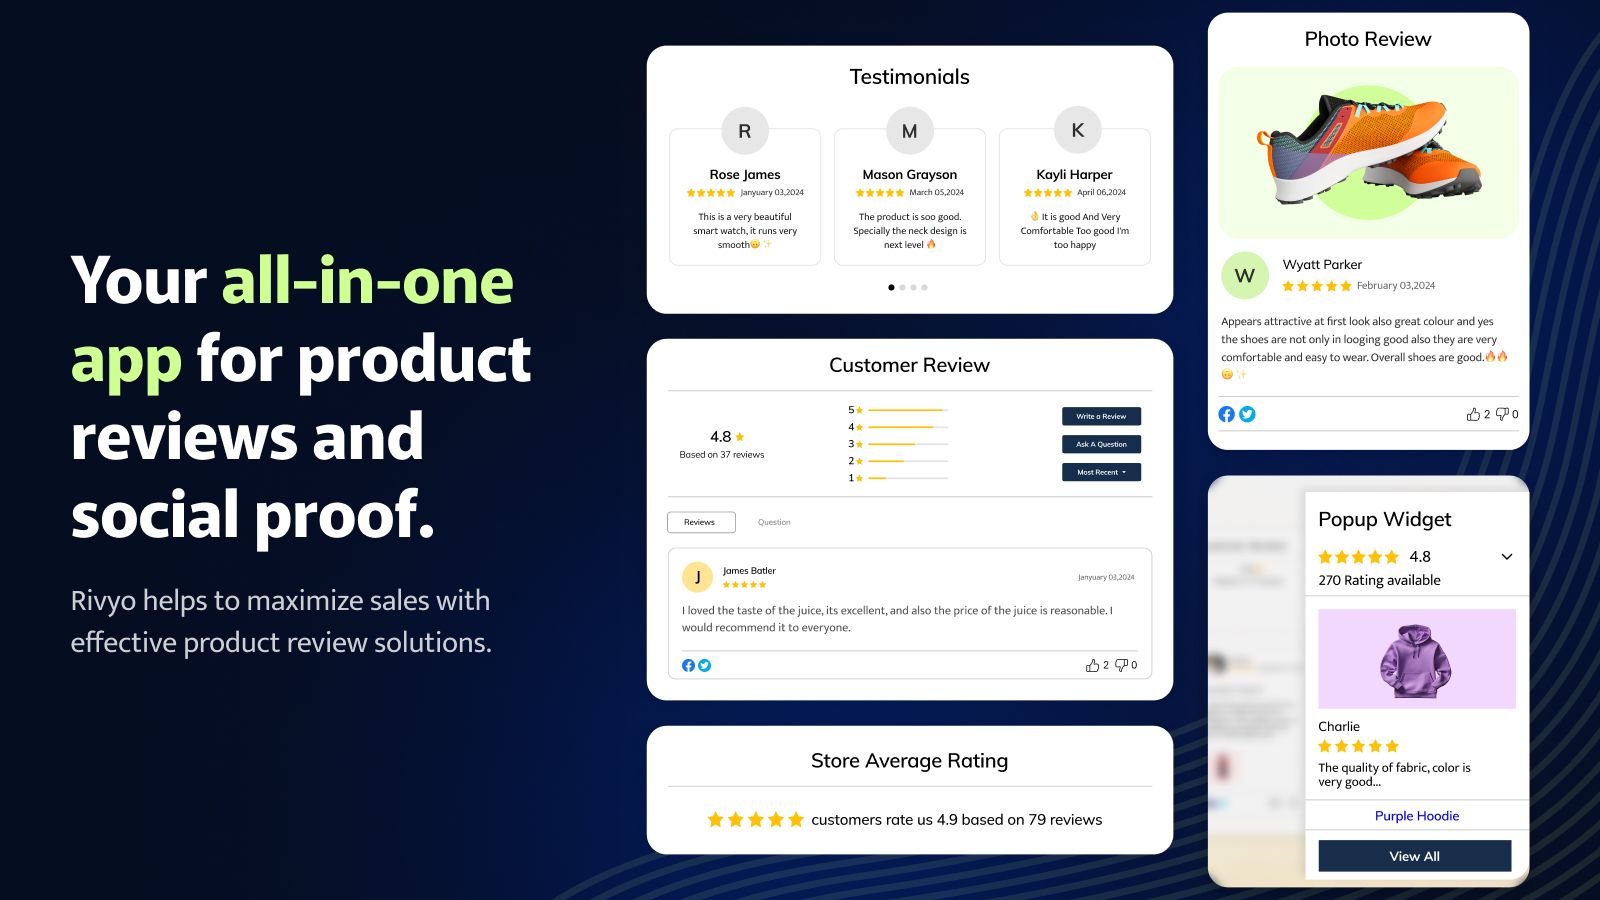 Showcase product reviews & ratings to build trust in customers.